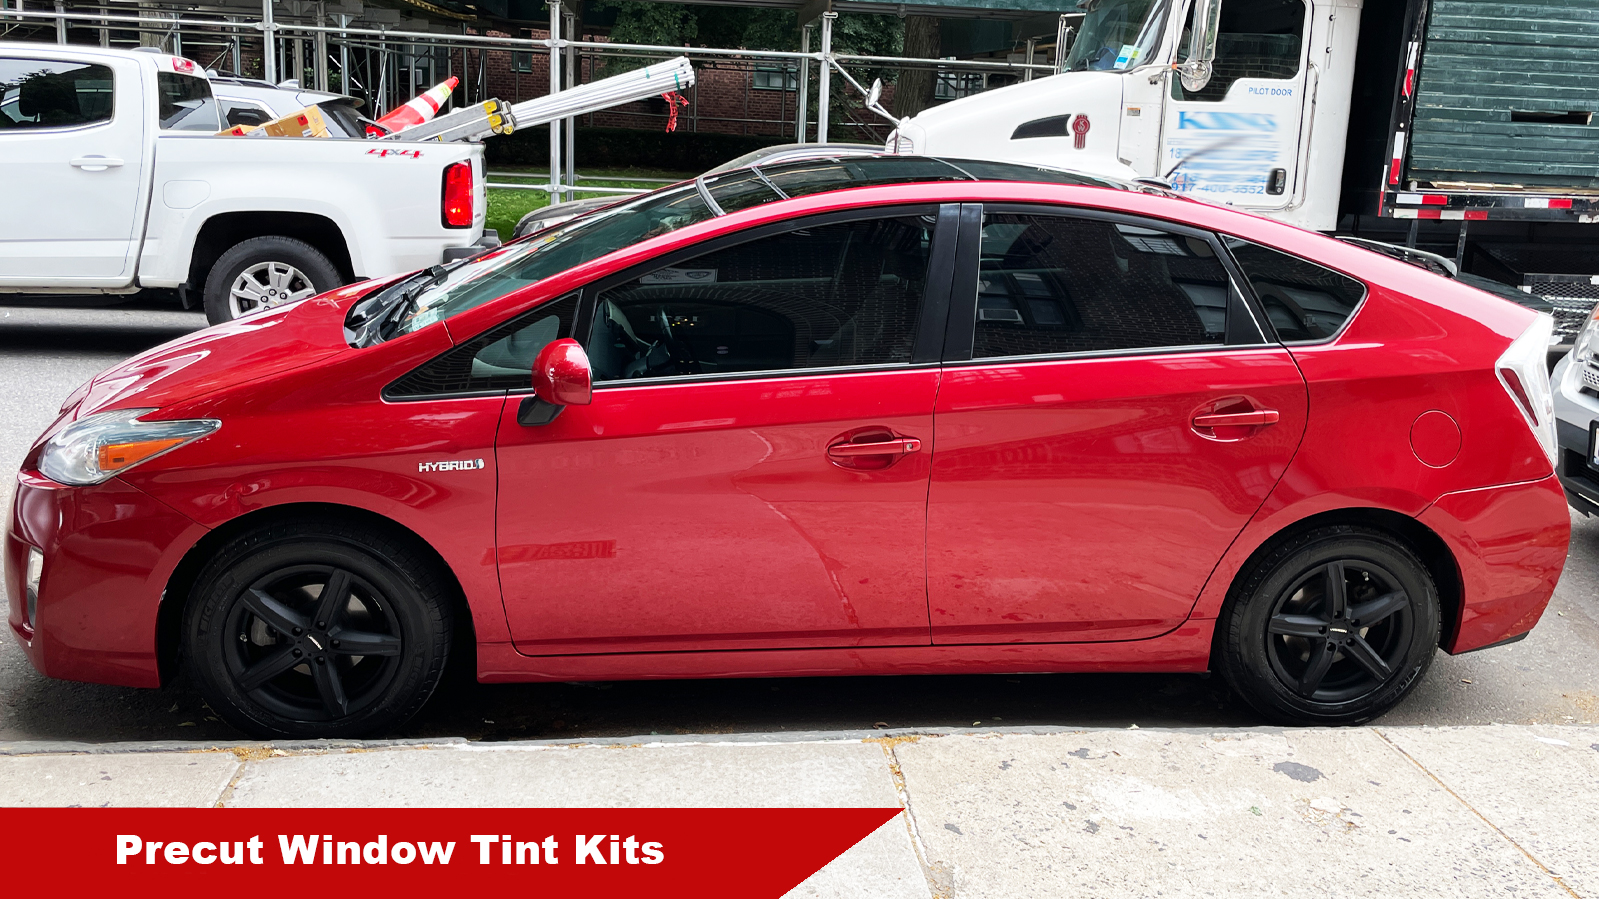 Pre-Cut Auto Window Tinting Kit for your Crew Cab Truck